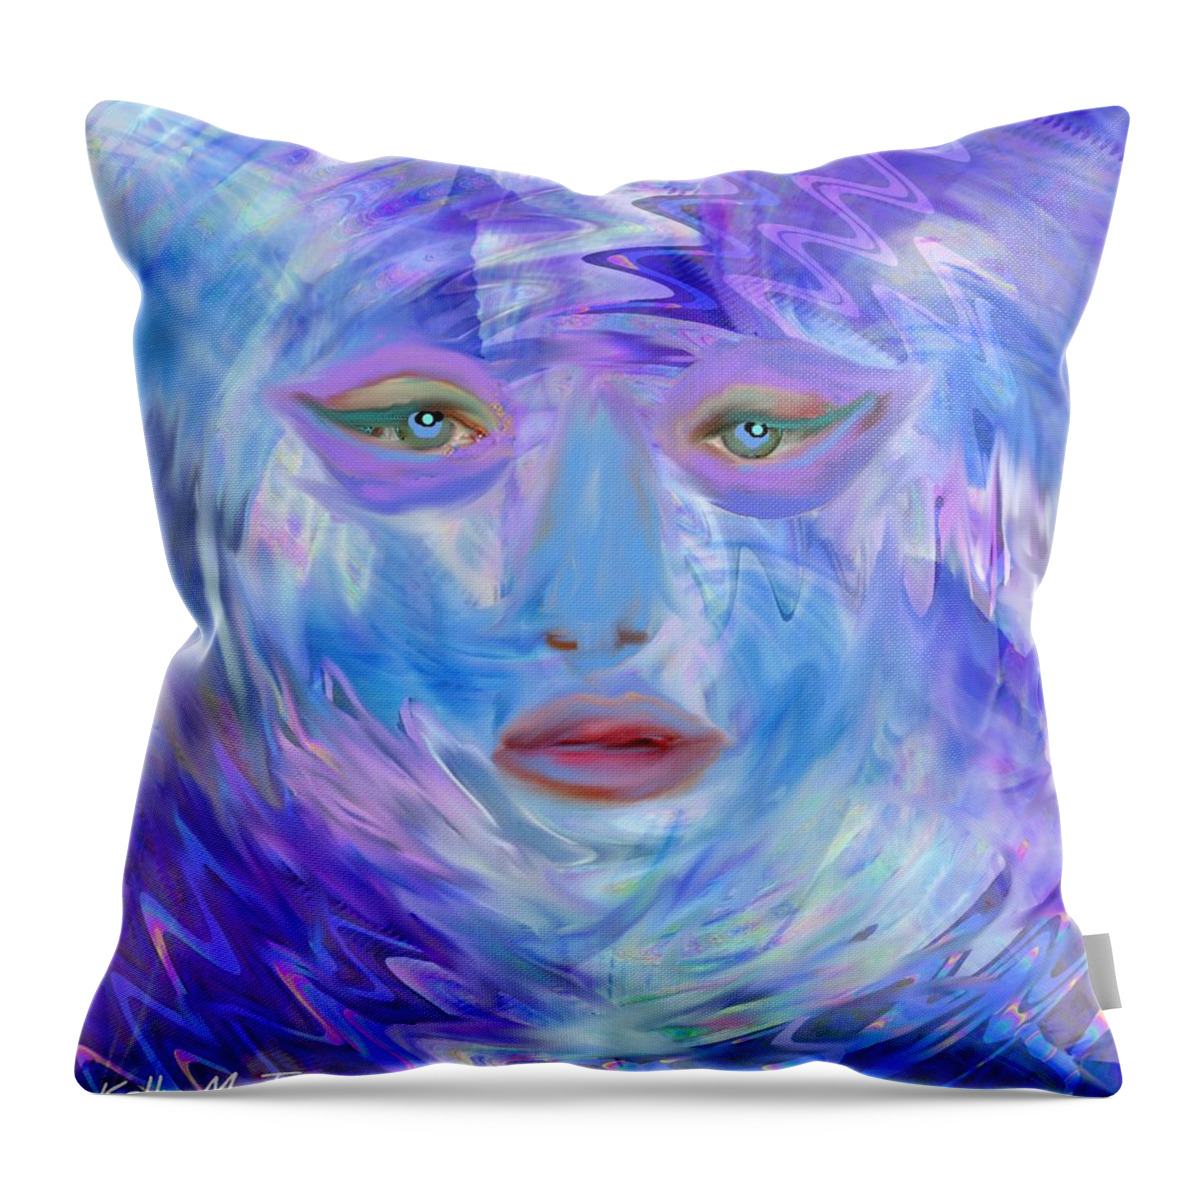 Digital Art Throw Pillow featuring the digital art Blue Waters by Kelly M Turner